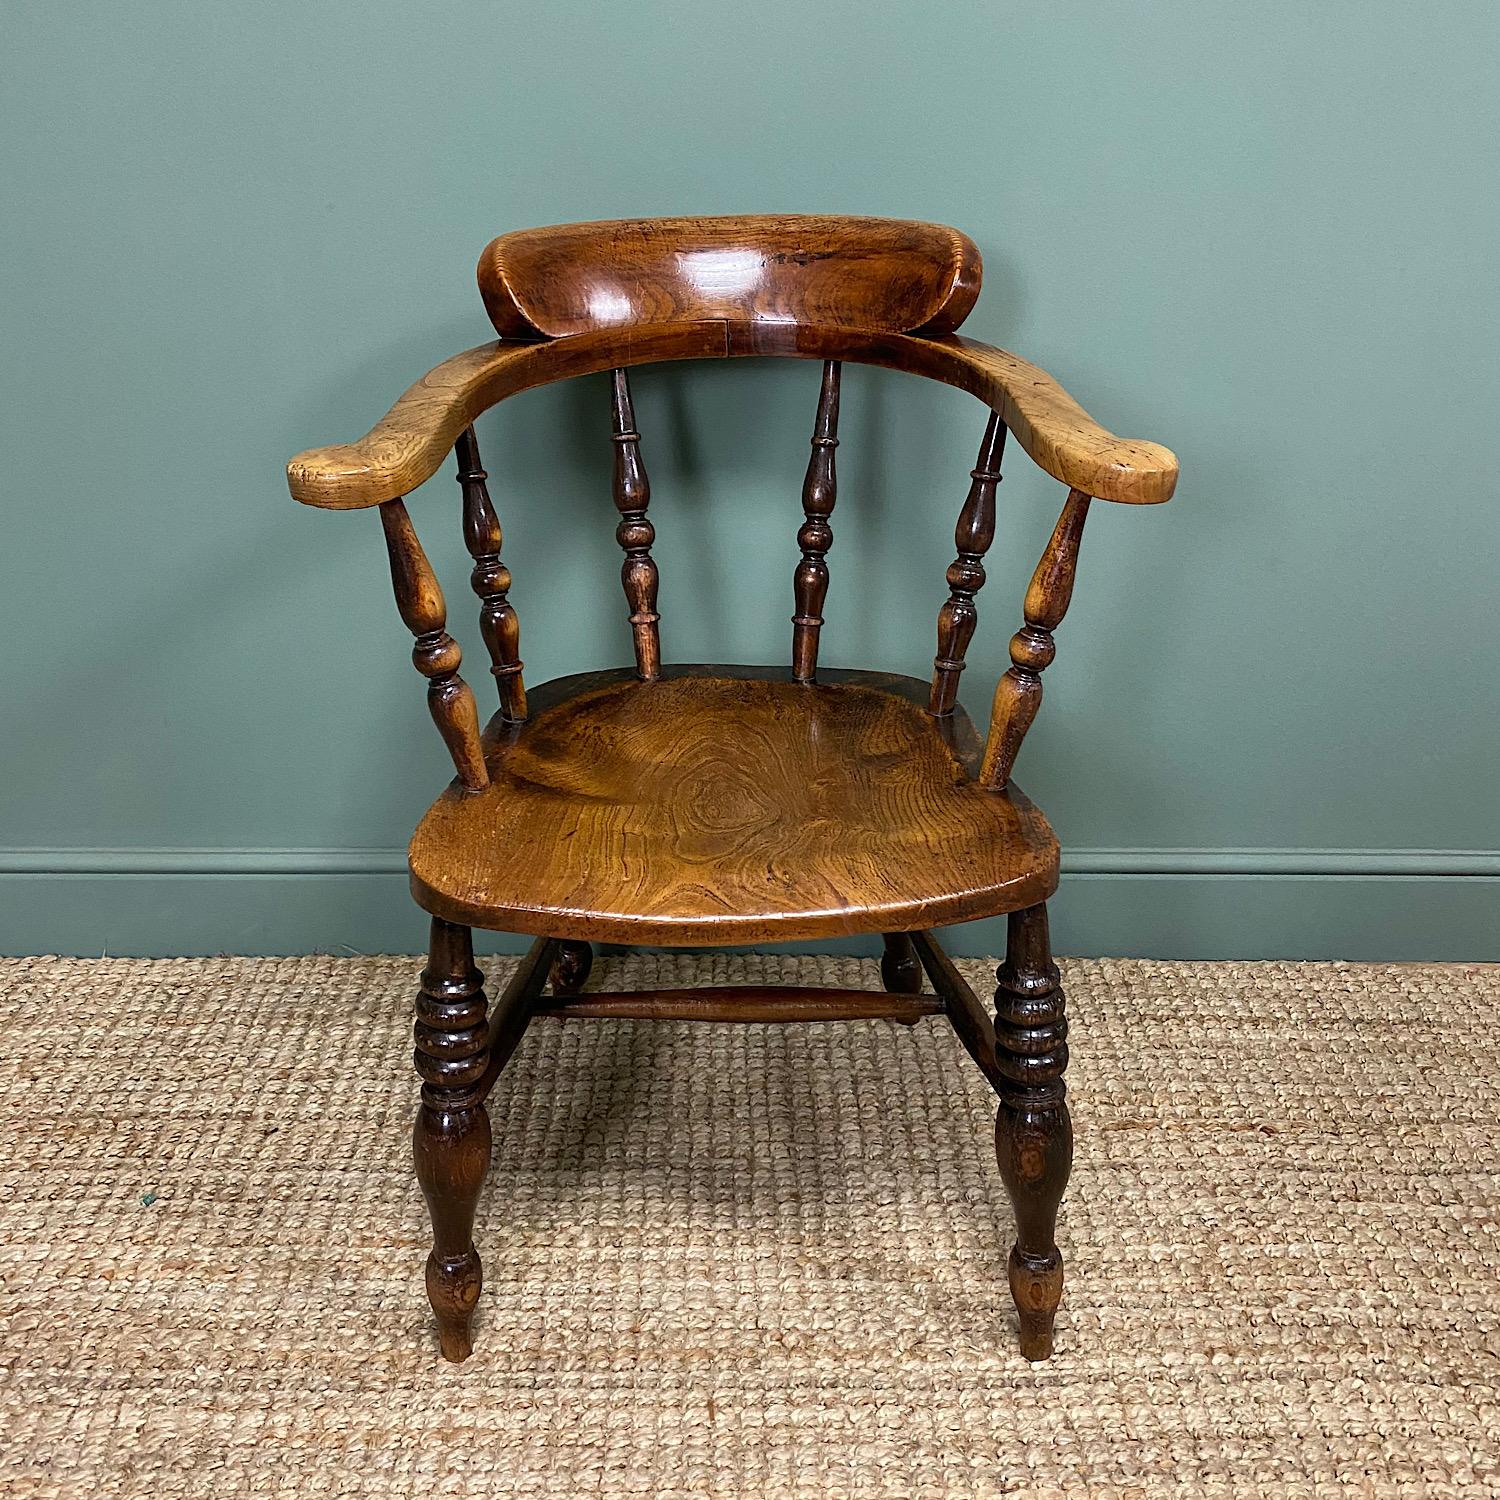 British 19th Century Antique Smokers Bow Chair For Sale